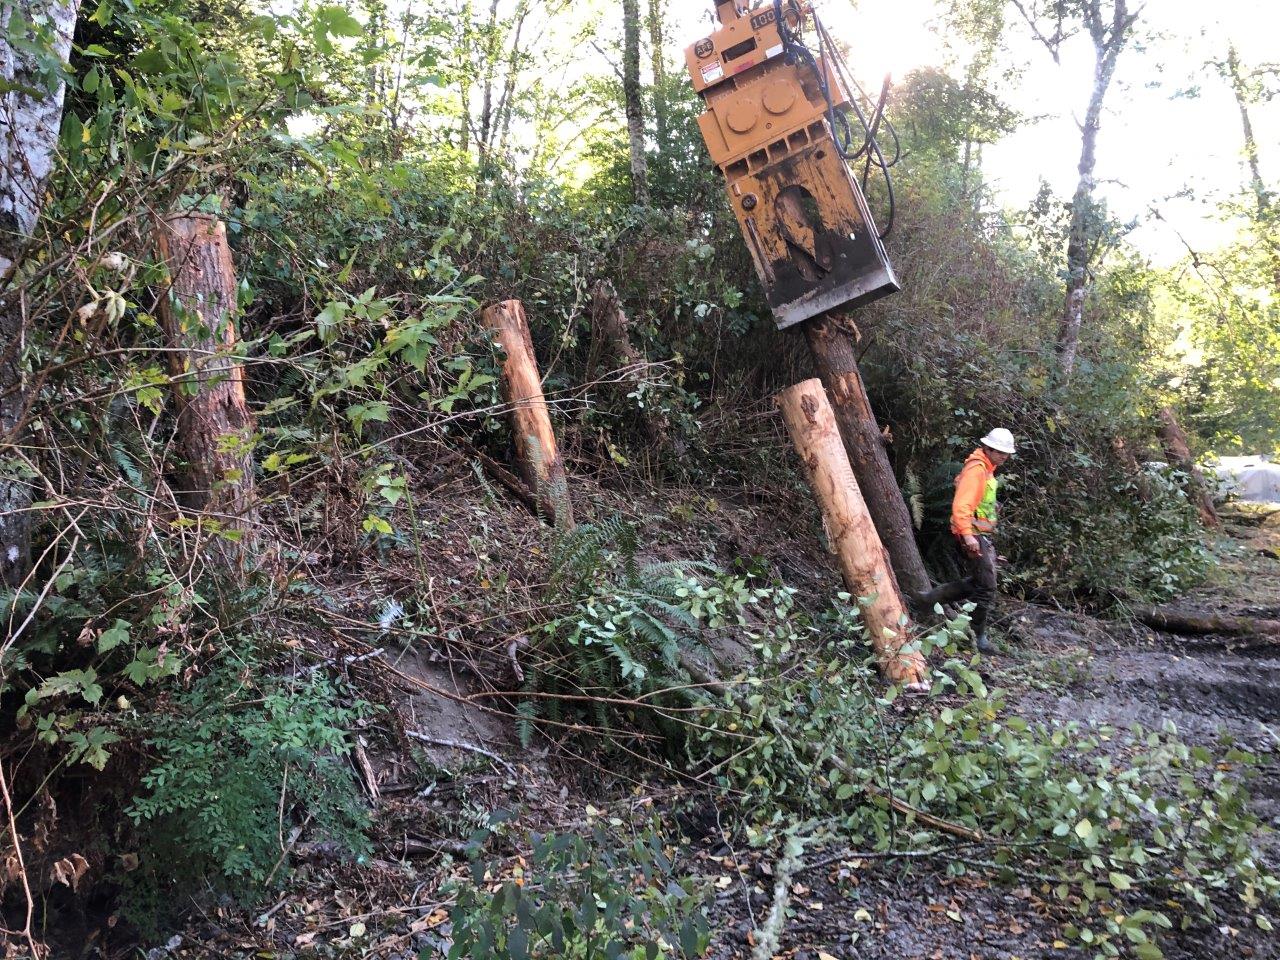 Machinery installing tree trunk pieces along the stream bank.